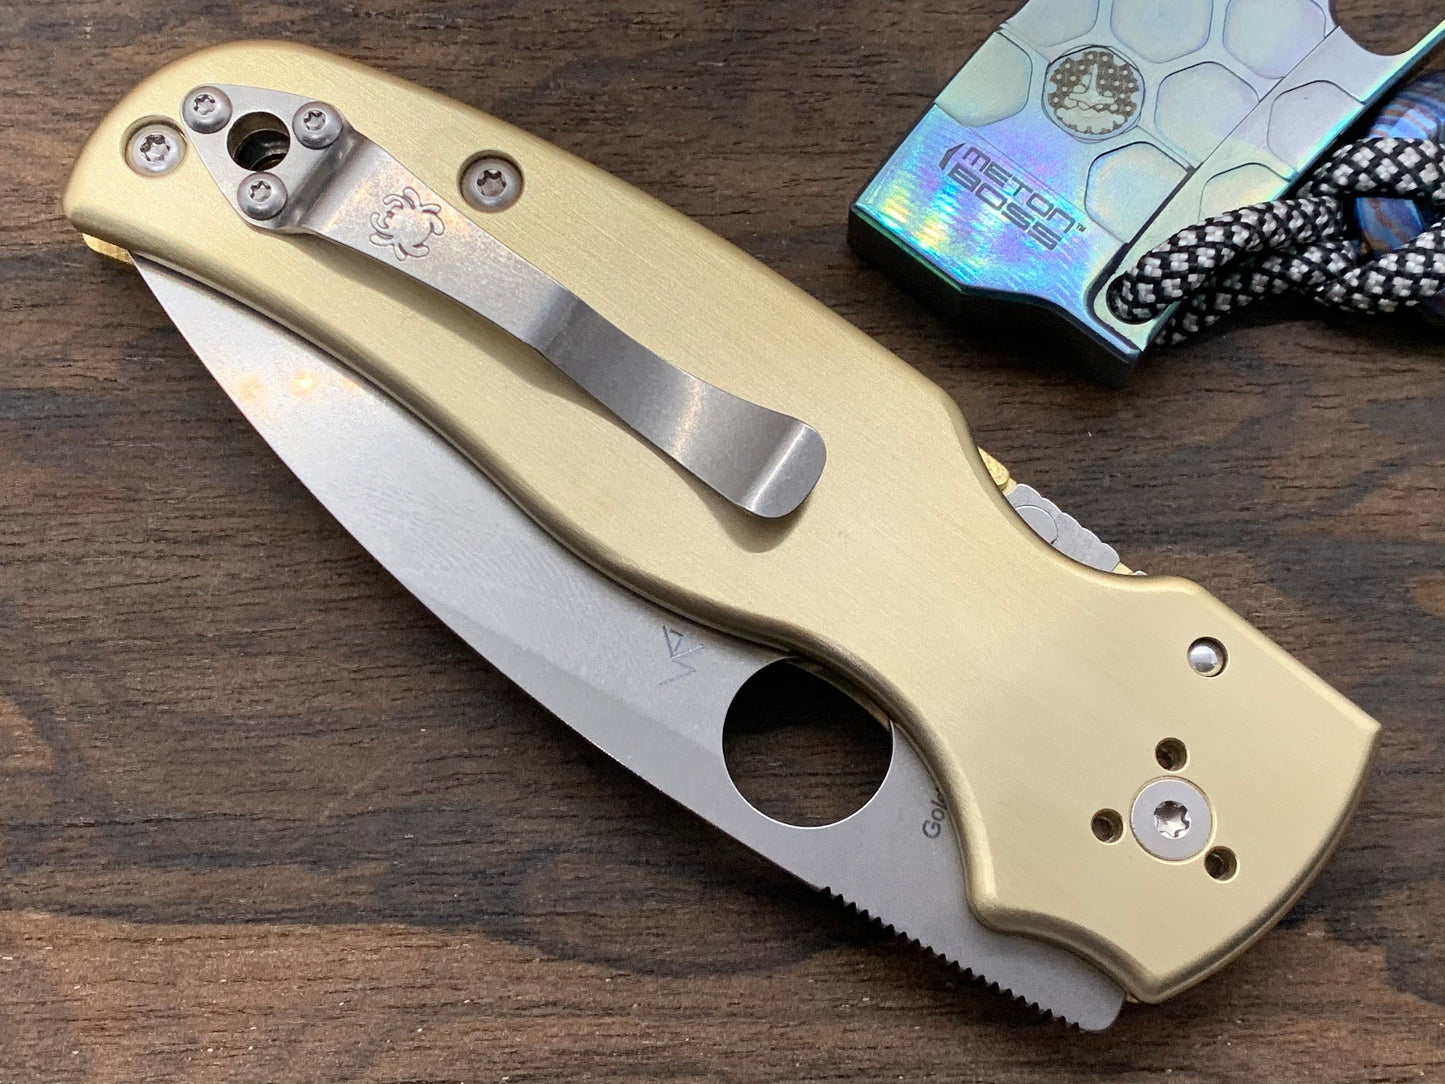 Brushed Brass Scales for SHAMAN Spyderco